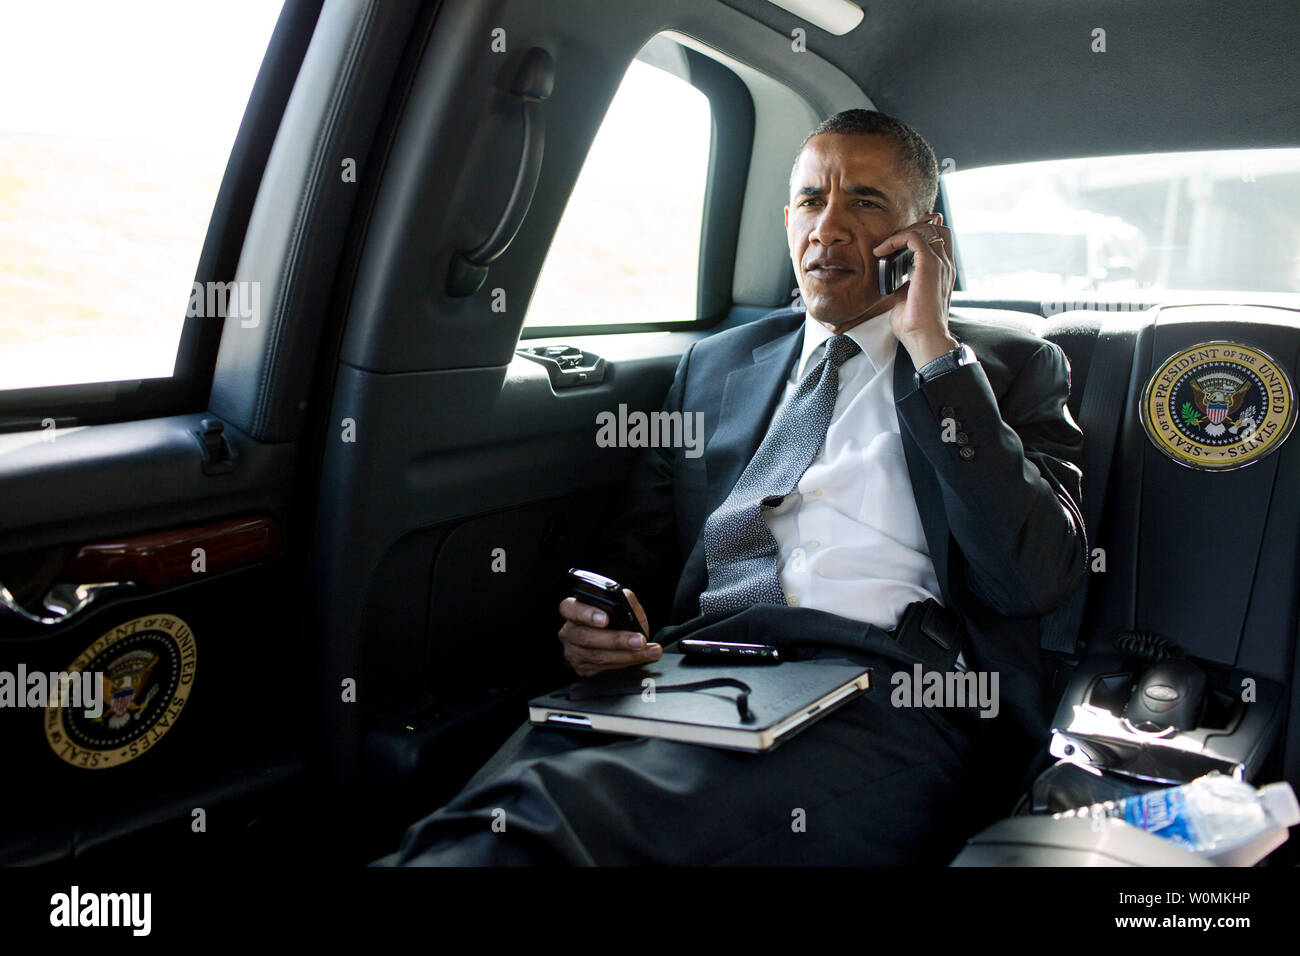 President Barack Obama talks on the phone with Aurora Mayor Steve Hogan during the motorcade ride to Palm Beach International Airport in Palm Beach, Florida, July 20, 2012. The President called Mayor Hogan to offer his condolences and support to the Aurora community.  Early Friday morning a gunman opened fire in a movie theater killing 12 and injuring 59. UPI/Pete Souza/White House Stock Photo